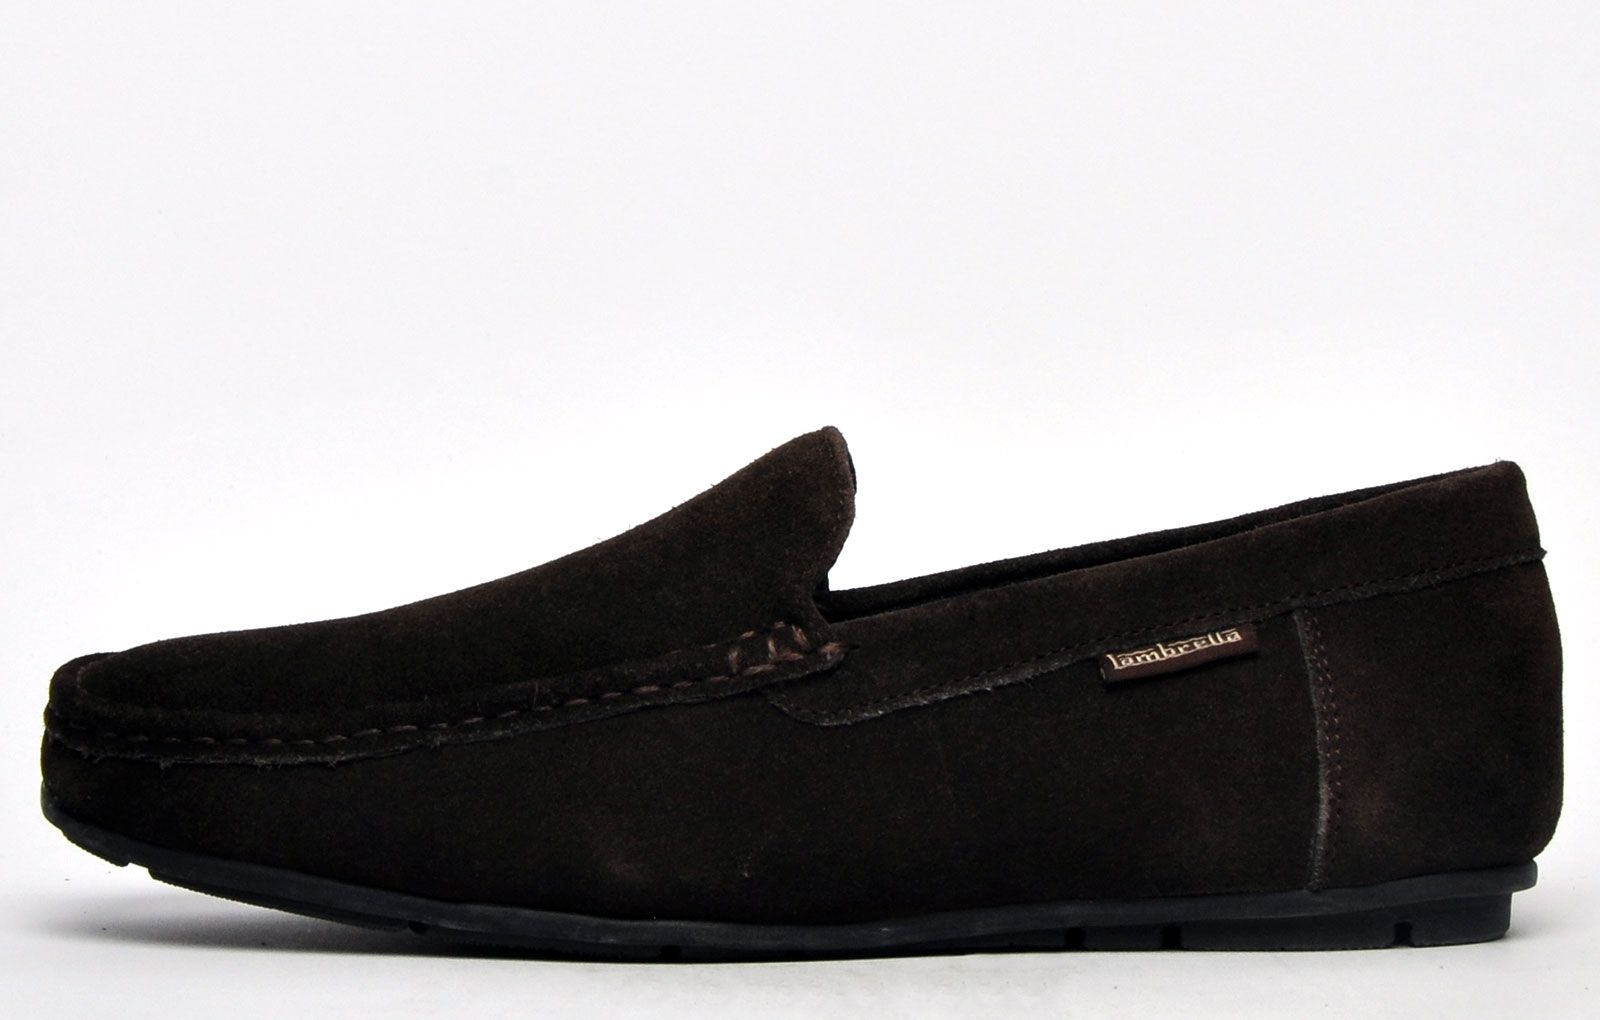 Classic and effective the classy design of these Lambretta Quad suede leather slip on loafers allow you to create effortless style no matter what the occasion. Presented in a soft suede leather upper and detailed with a clean cut and designer stitch detailing, these high end dress shoes exert charm for a quirky, dapper finish, a must have addition to any wardrobe. The quality suede leather upper sits on a hard-wearing rubber outsole for superb durability that wont let you down wherever you go.
-Premium suede leather upper
-Durable rubber grip sole
-Soft padded comfort footbed
-Easy on/off slip on wear
-Designer stitch detailing throughout
-Lambretta branding